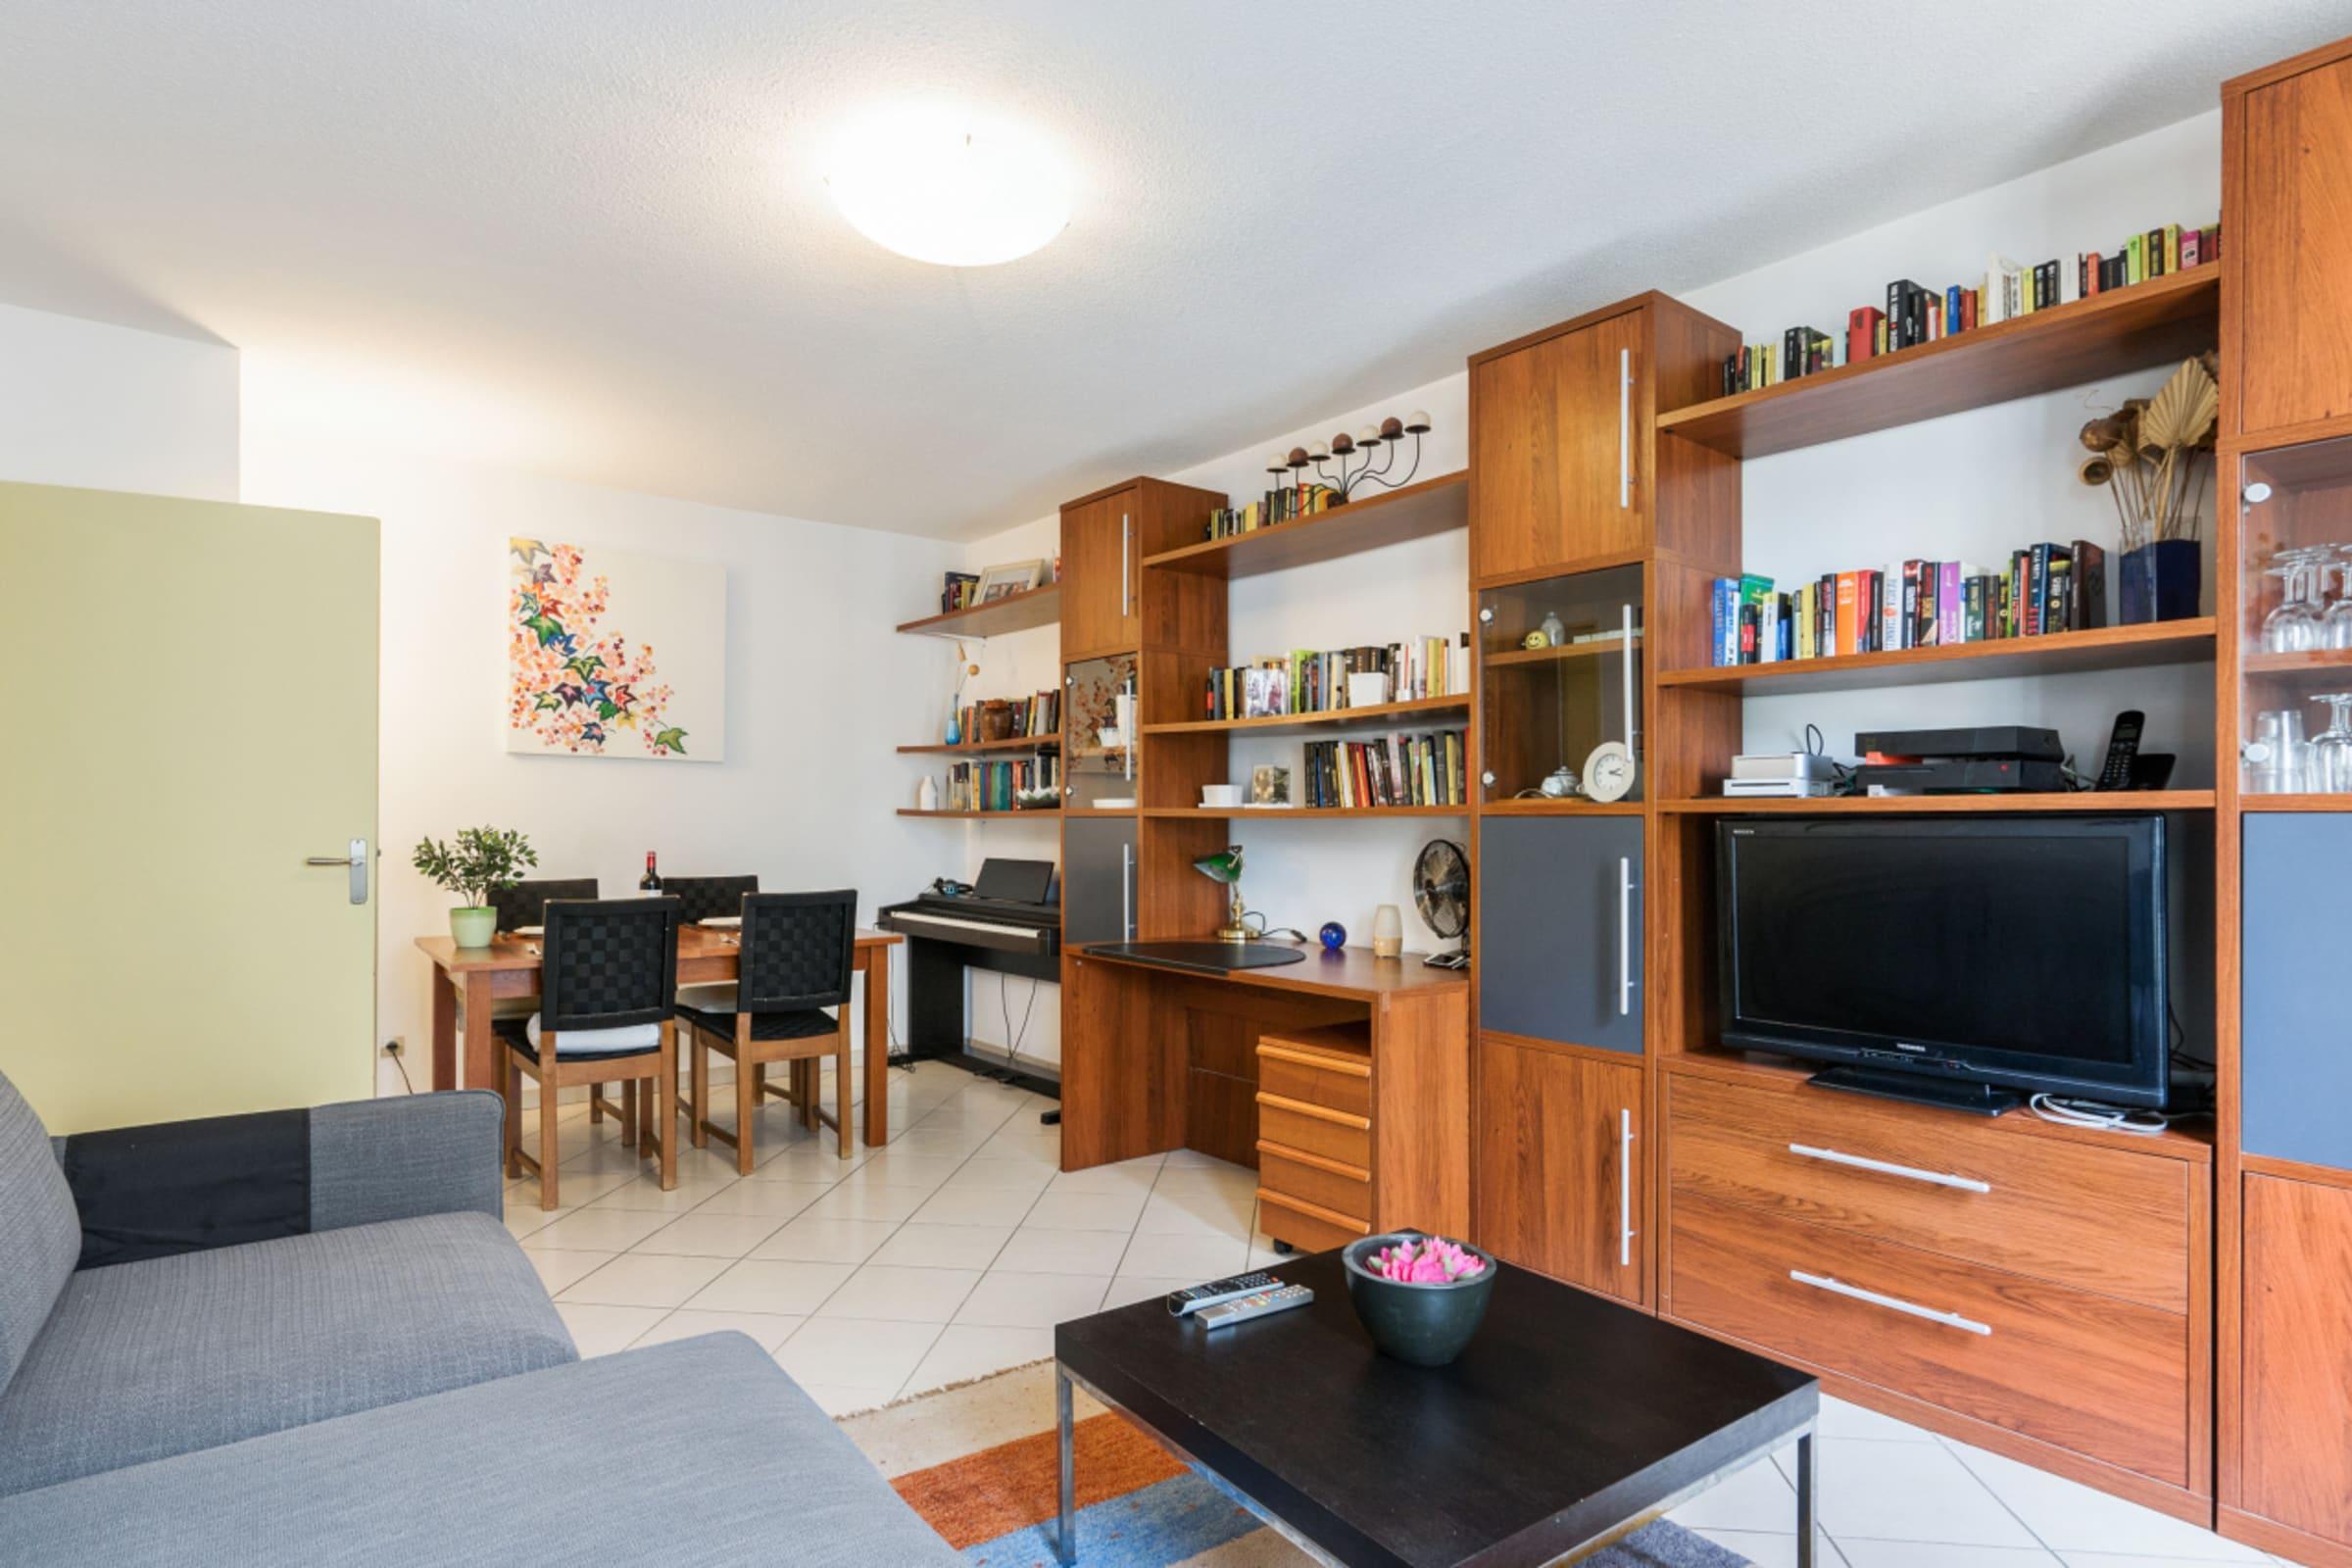 Property Image 1 - Apartment near the city center of Montpellier